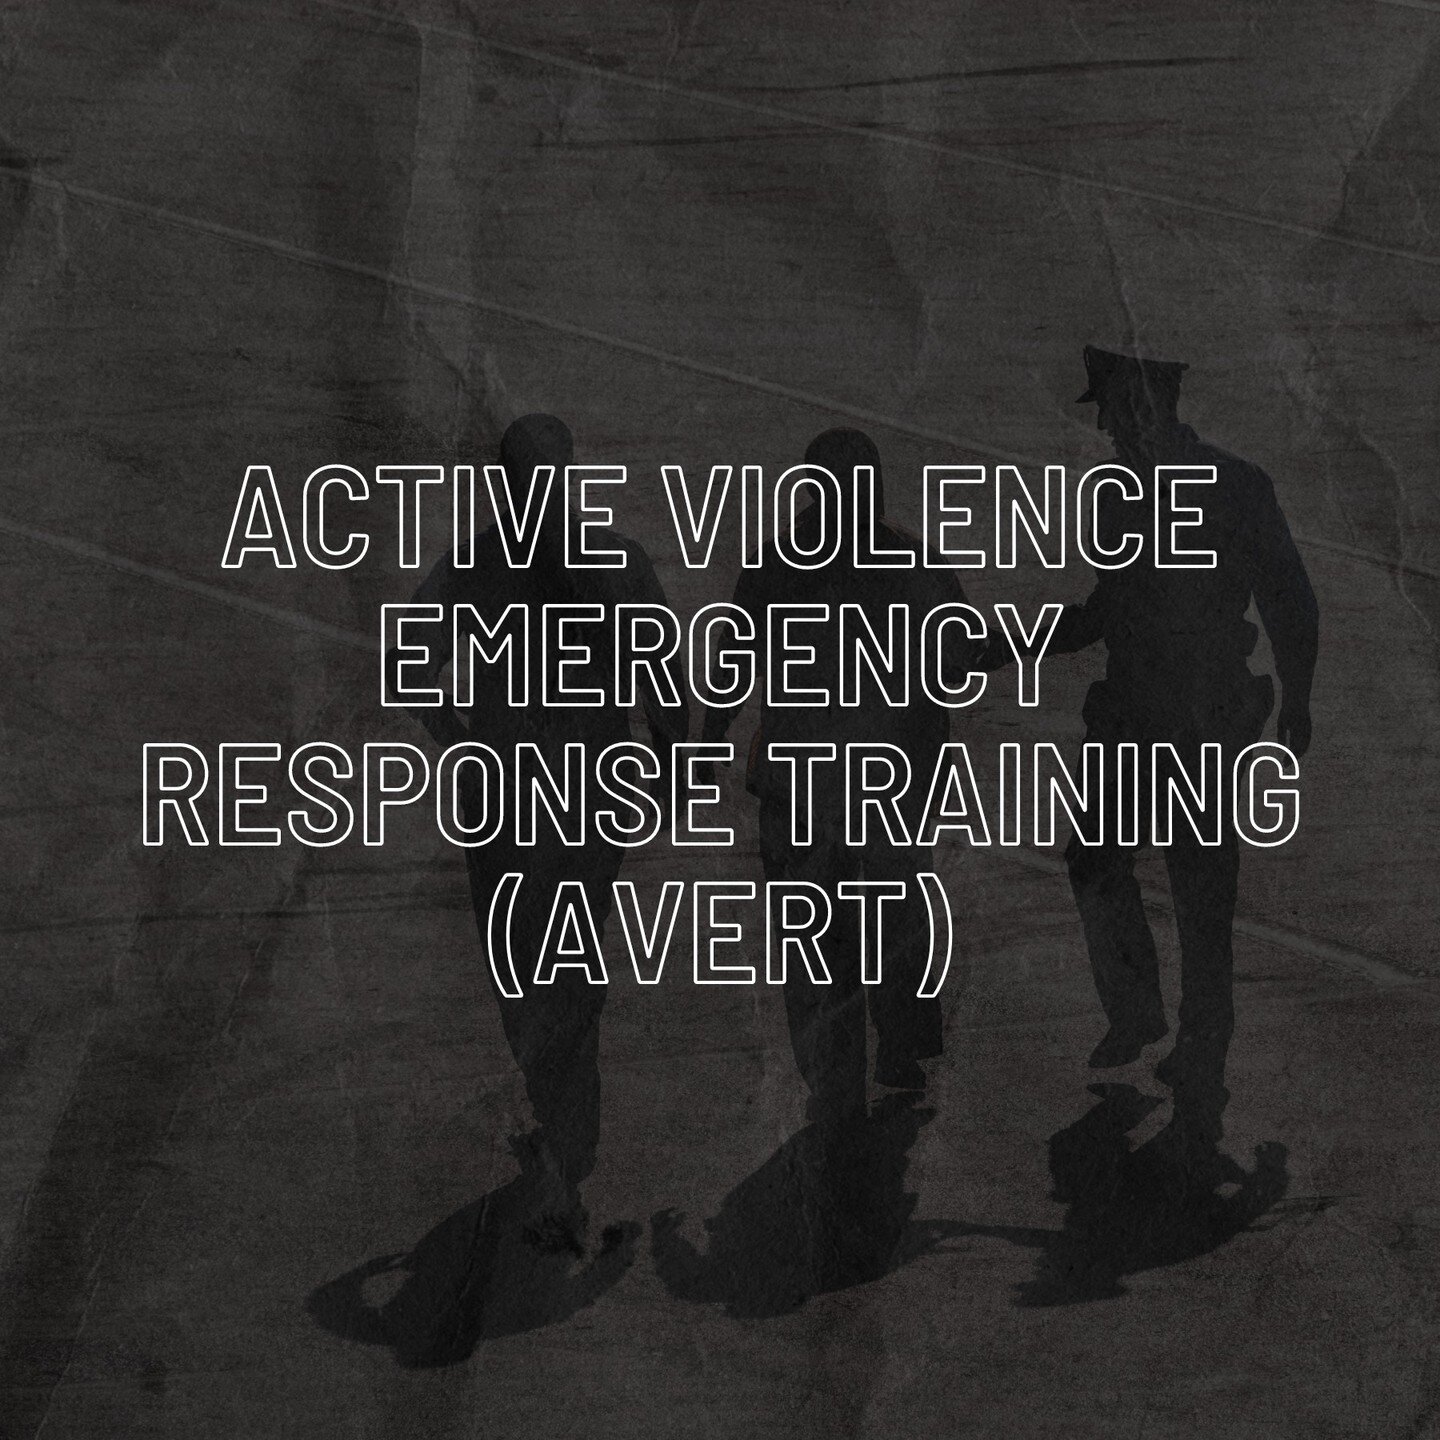 Active Violence Emergency Response Training (AVERT) gives students the tools and skills to understand how to recognize warning signs, react quickly in an active shooter incident, and learn how to control bleeding in life- threatening situations. AVER